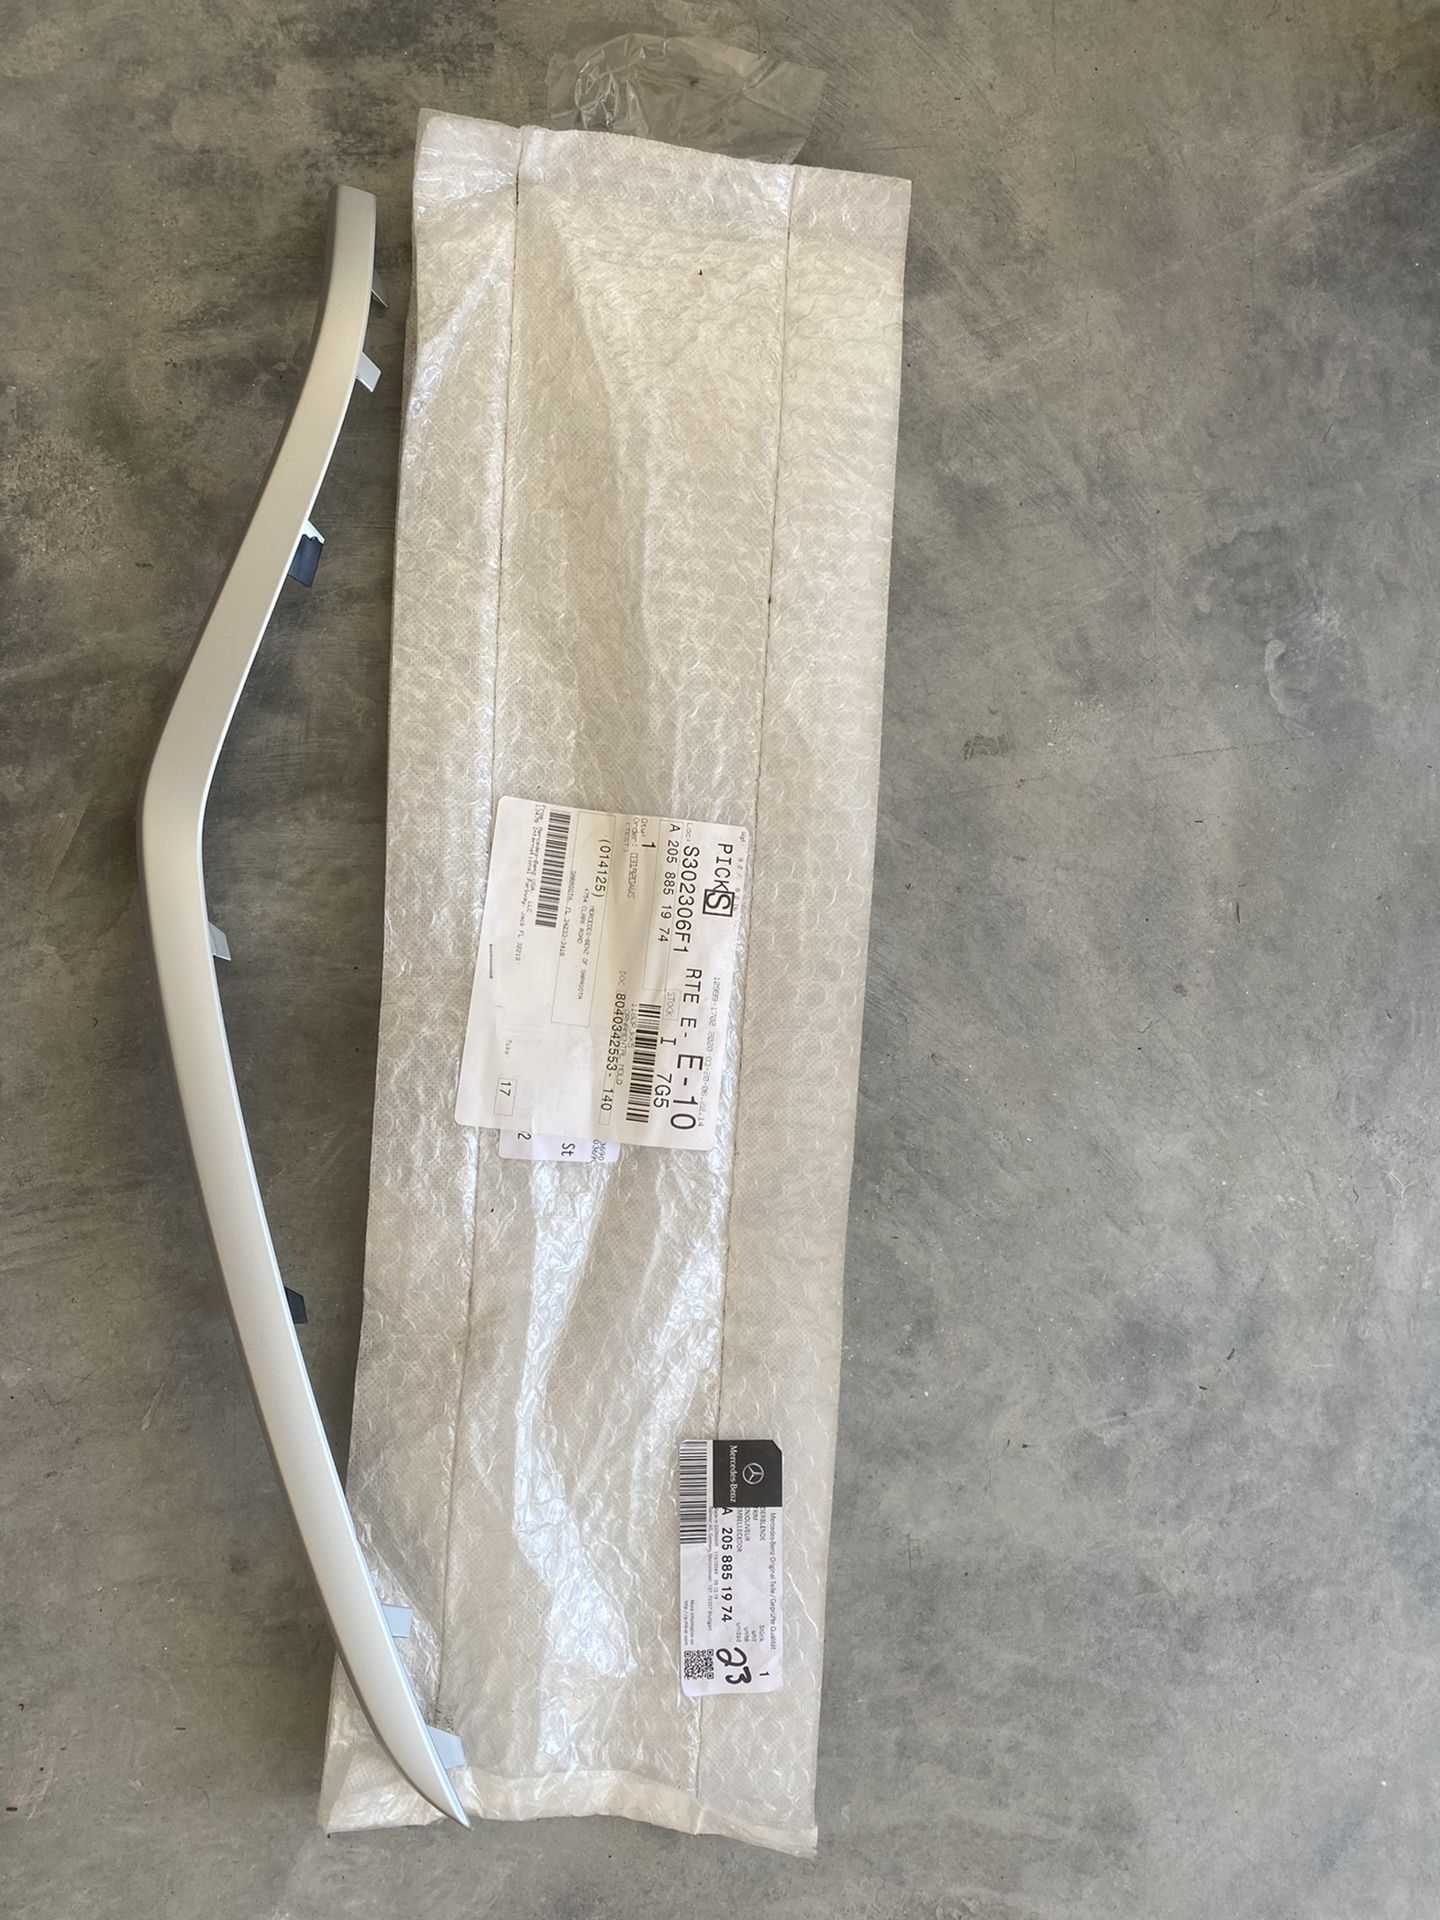 OEM original 20152019 Mercedes Benz side molding Part number A {contact info removed}